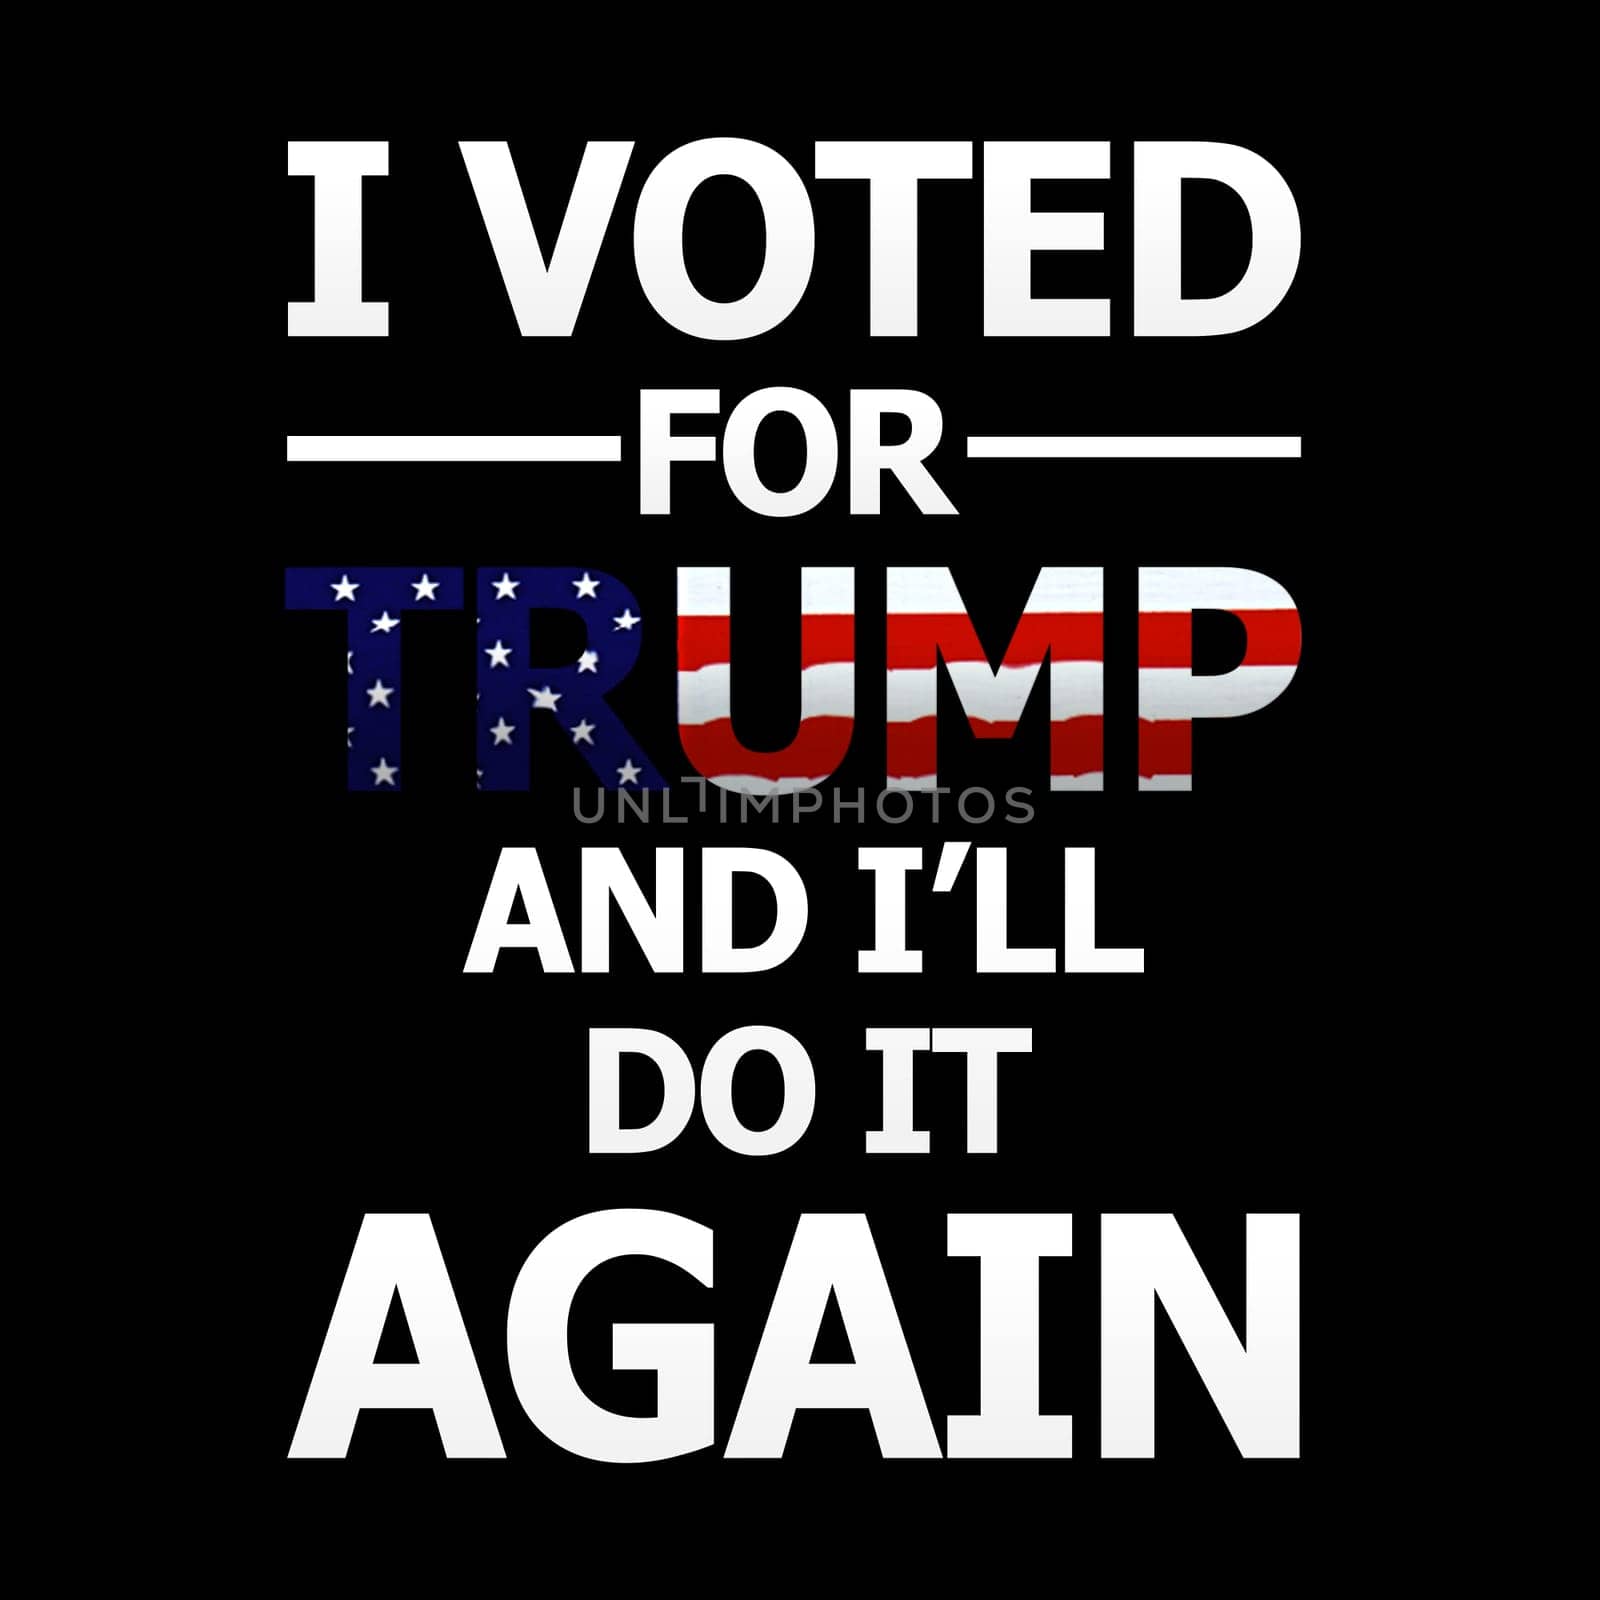 A poster with the text "I voted for Trump and I'll do it again".